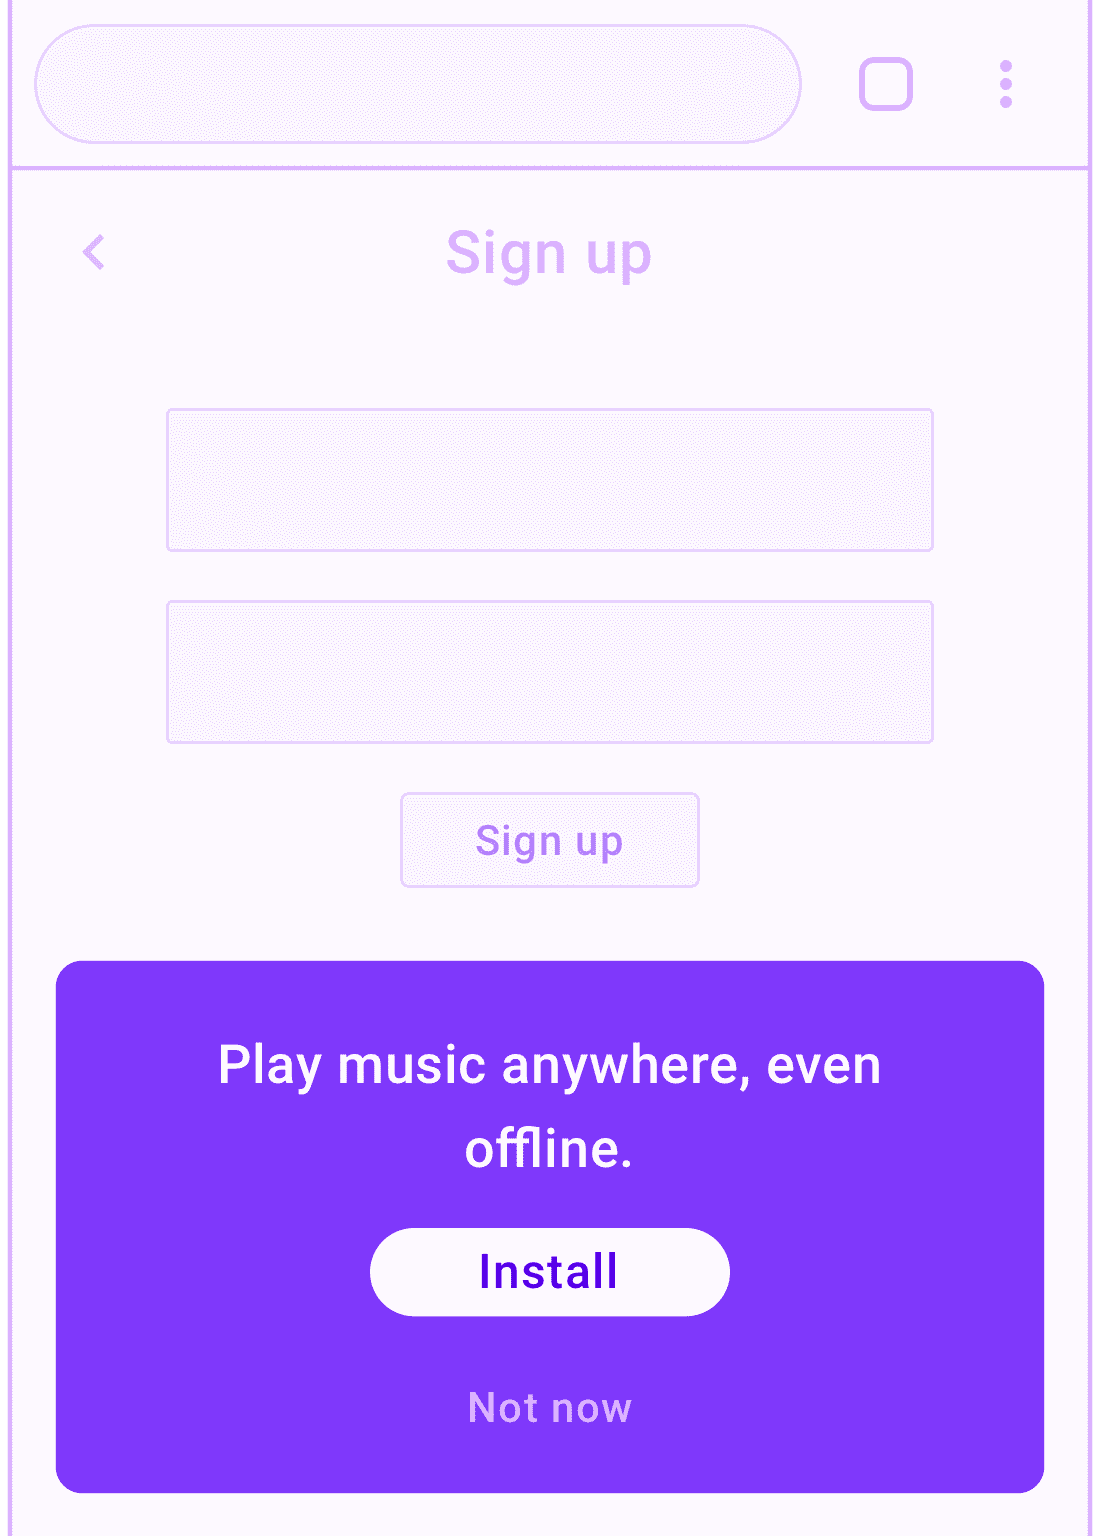 A custom install button on the sign up page.